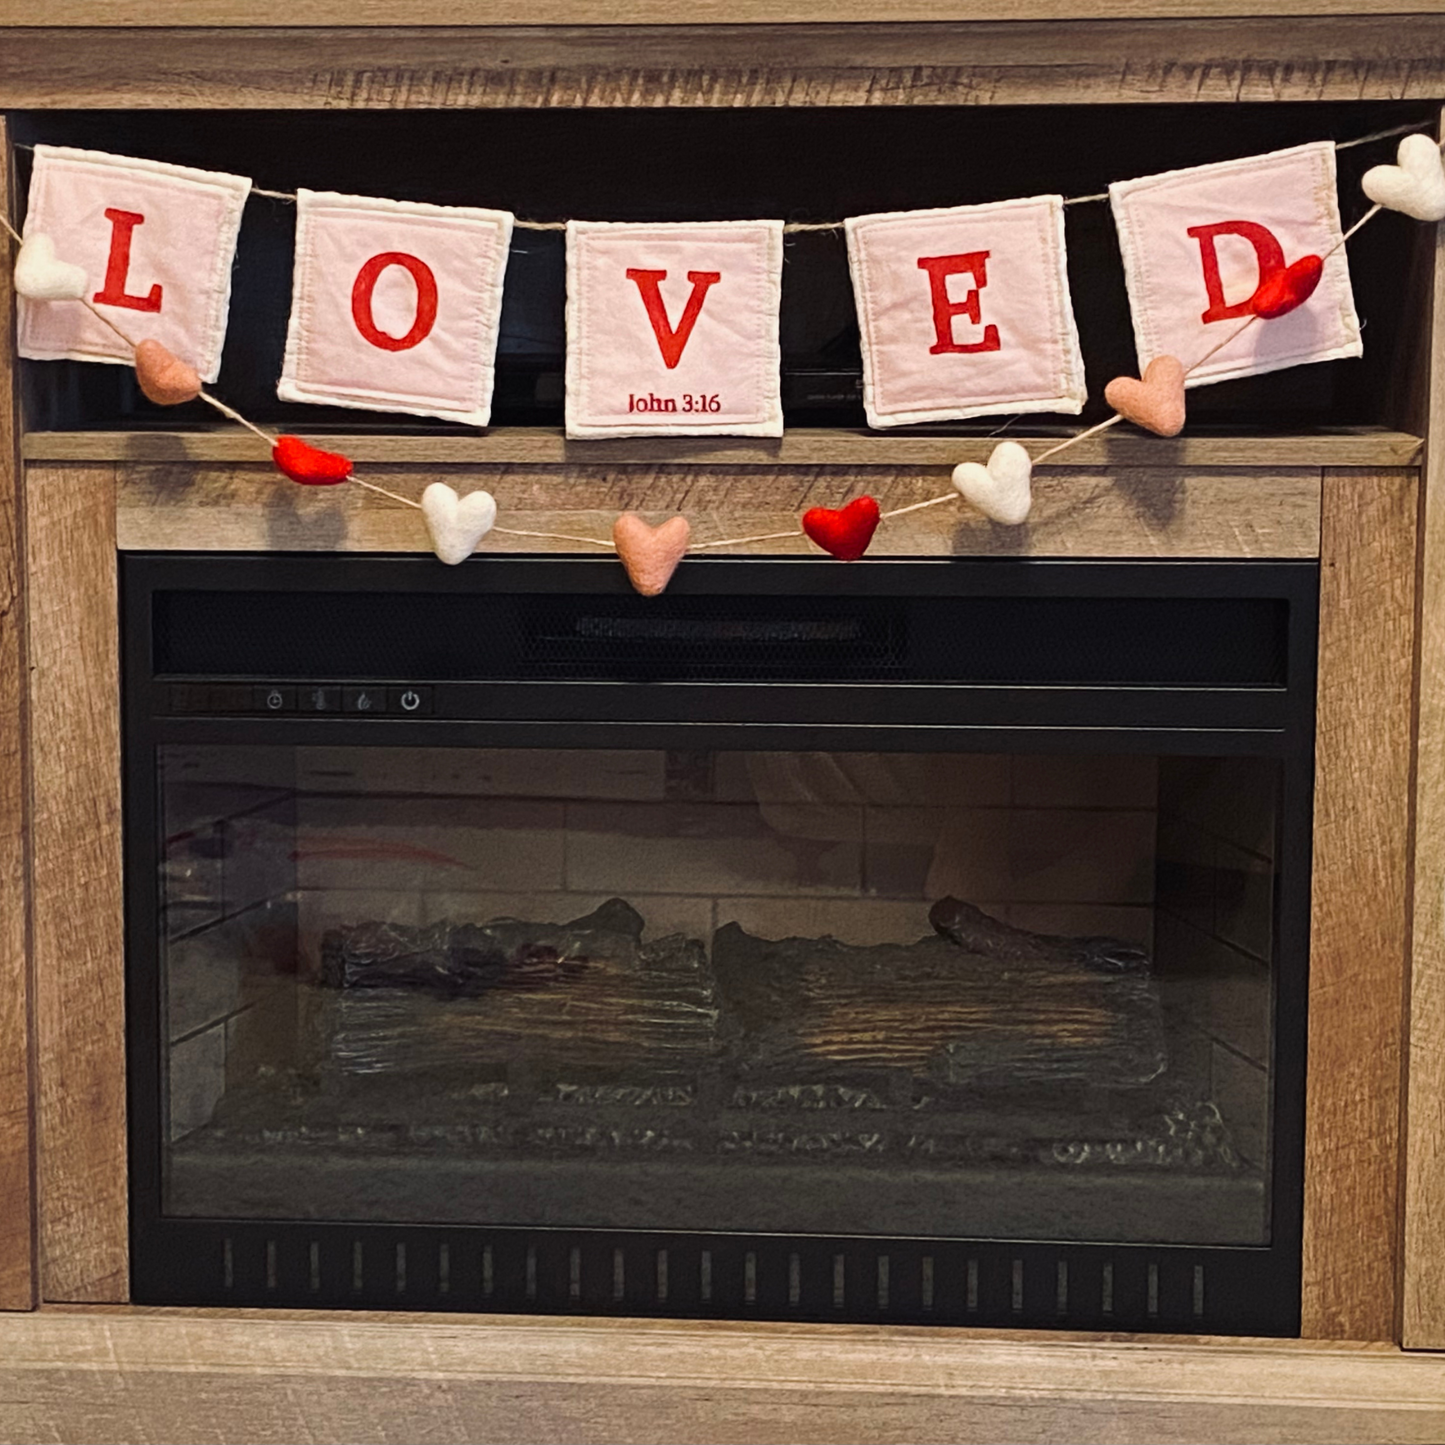 “Loved” John 3:16 Fabric, Hand-Painted Valentine Banner 3 foot